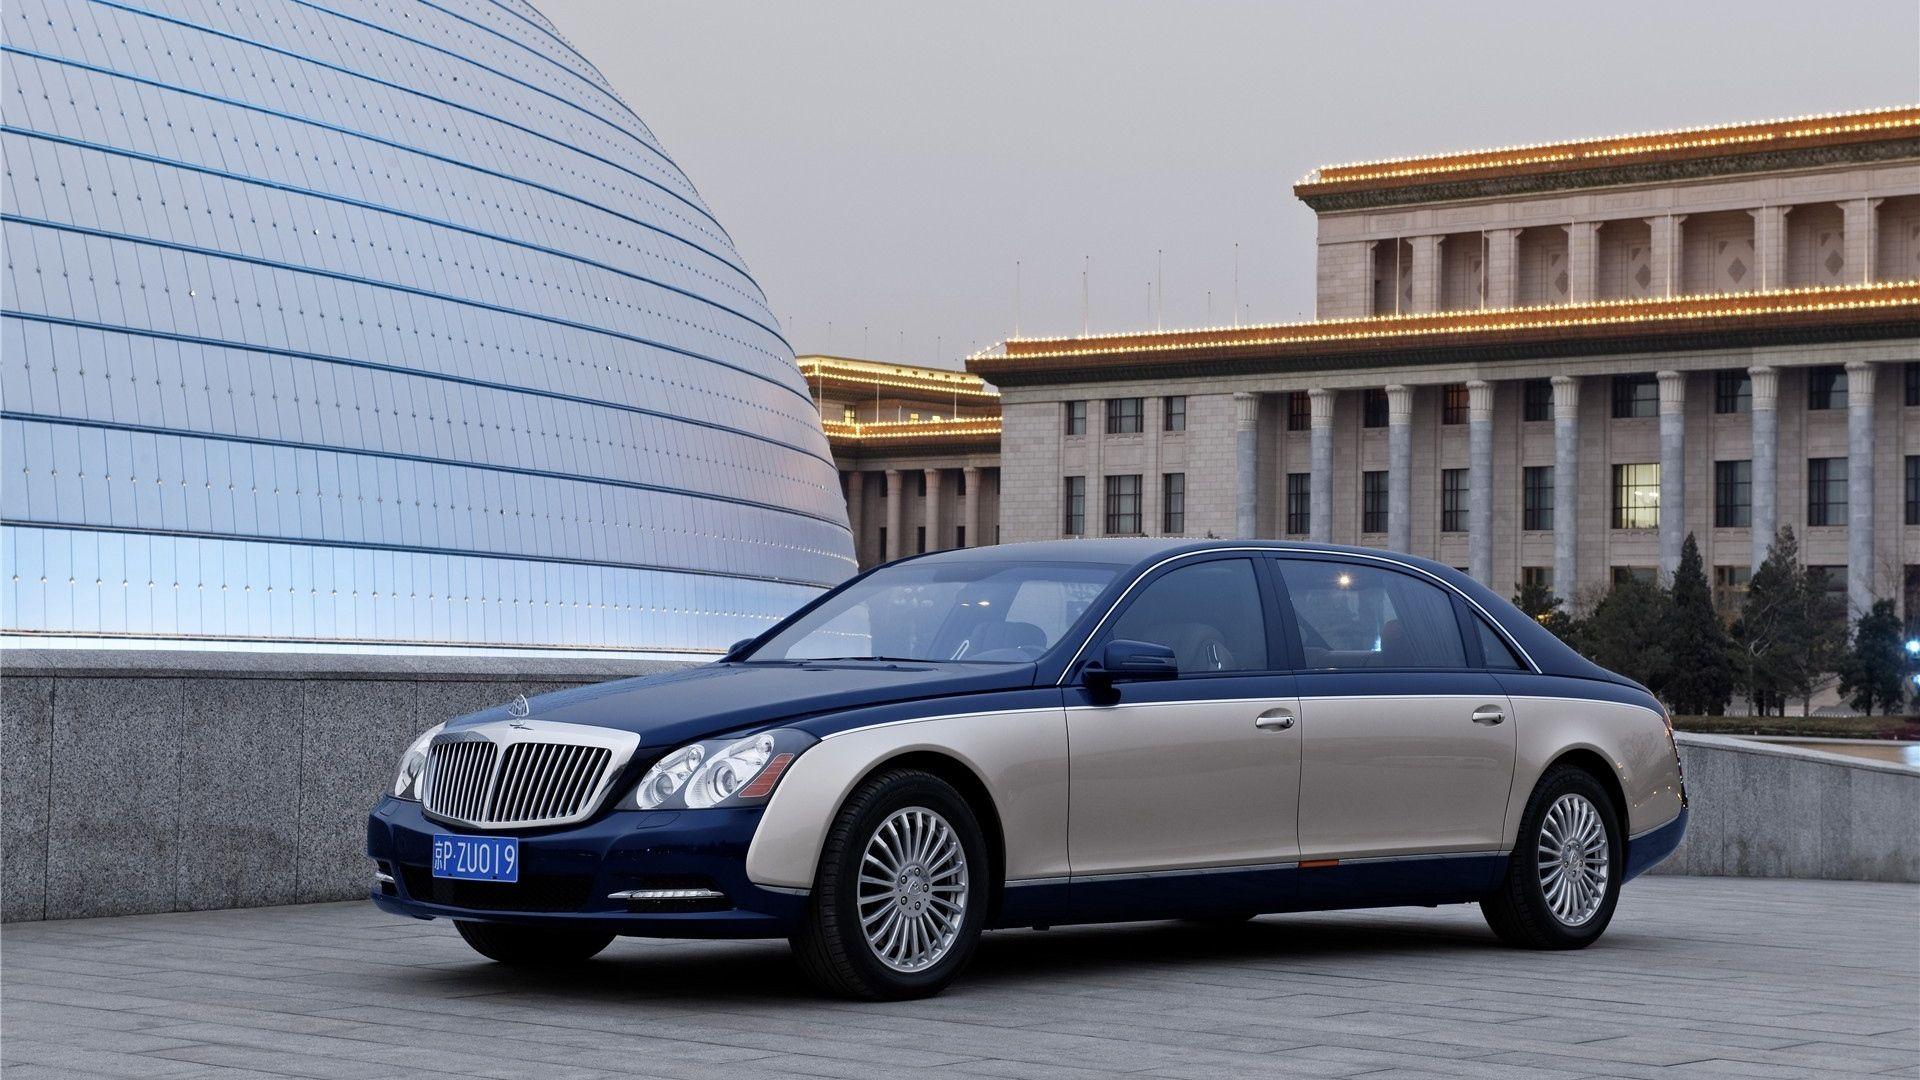 Download wallpaper 1920x1080 maybach 62 s, white, blue, city, side